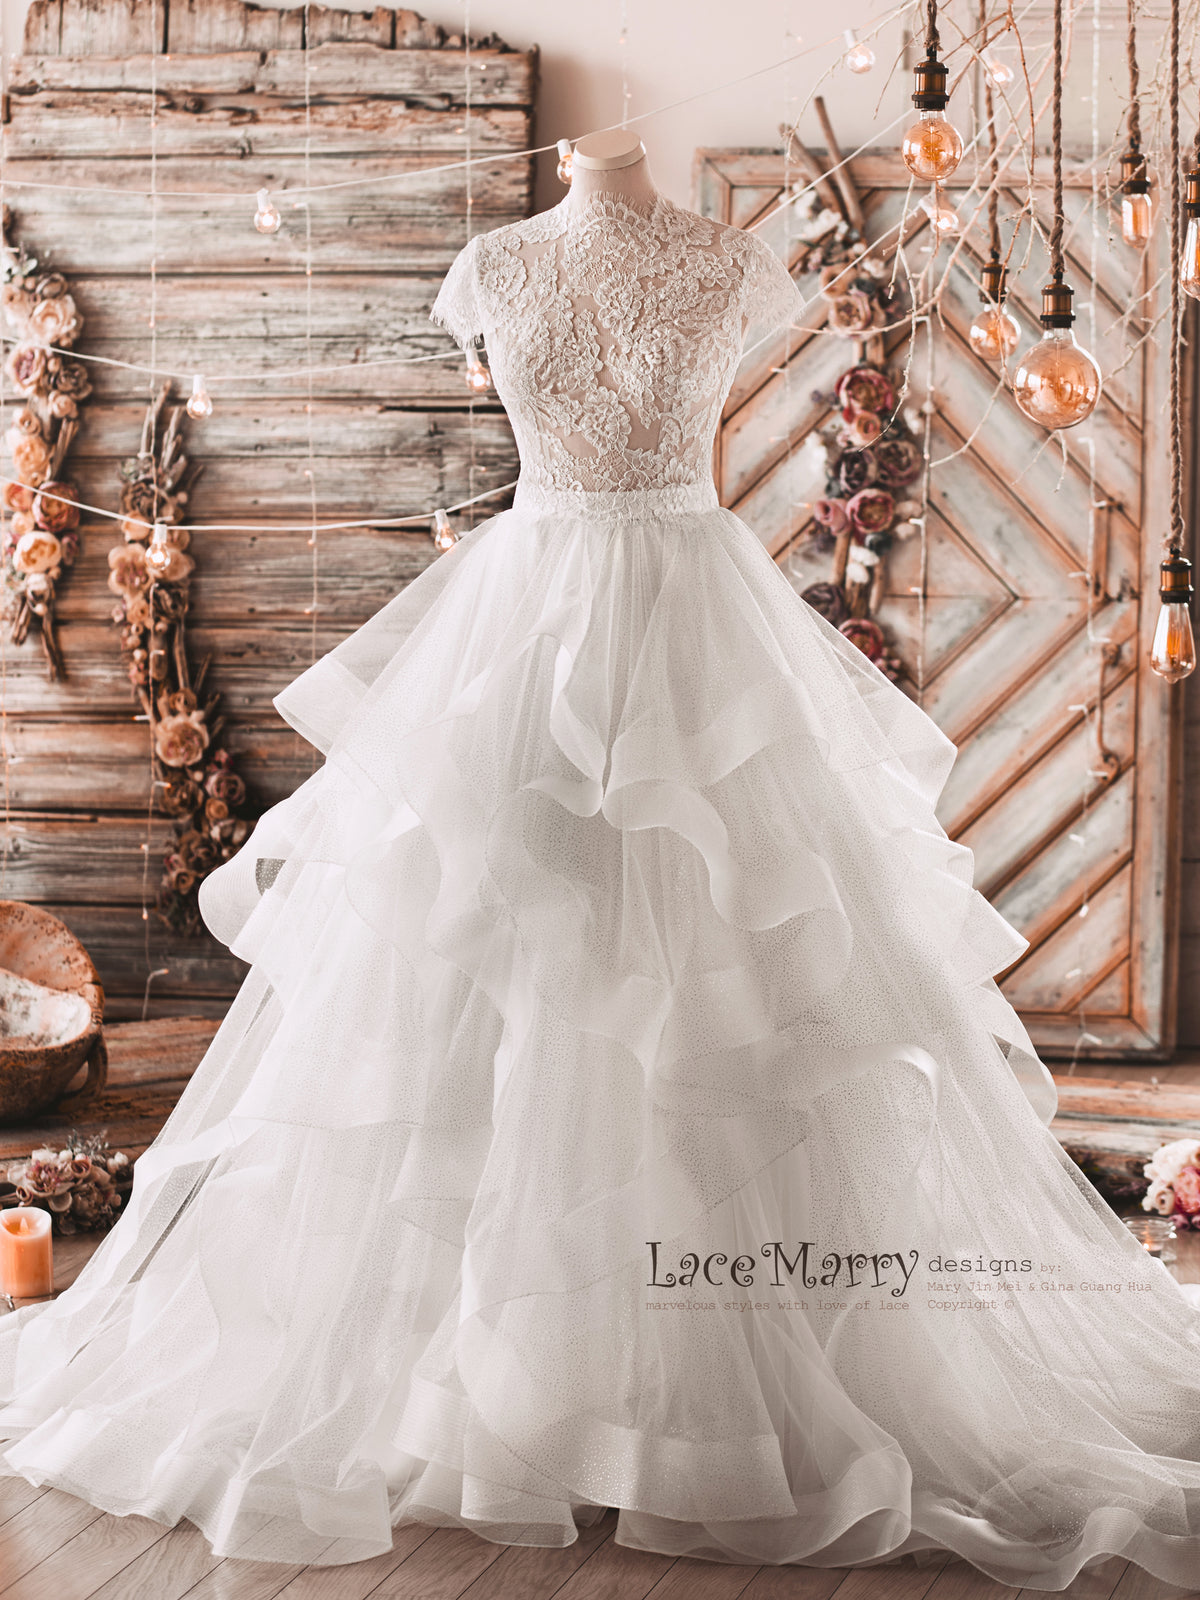 Rustic Long Sleeved Lace Crop Top Two Piece Wedding Dress